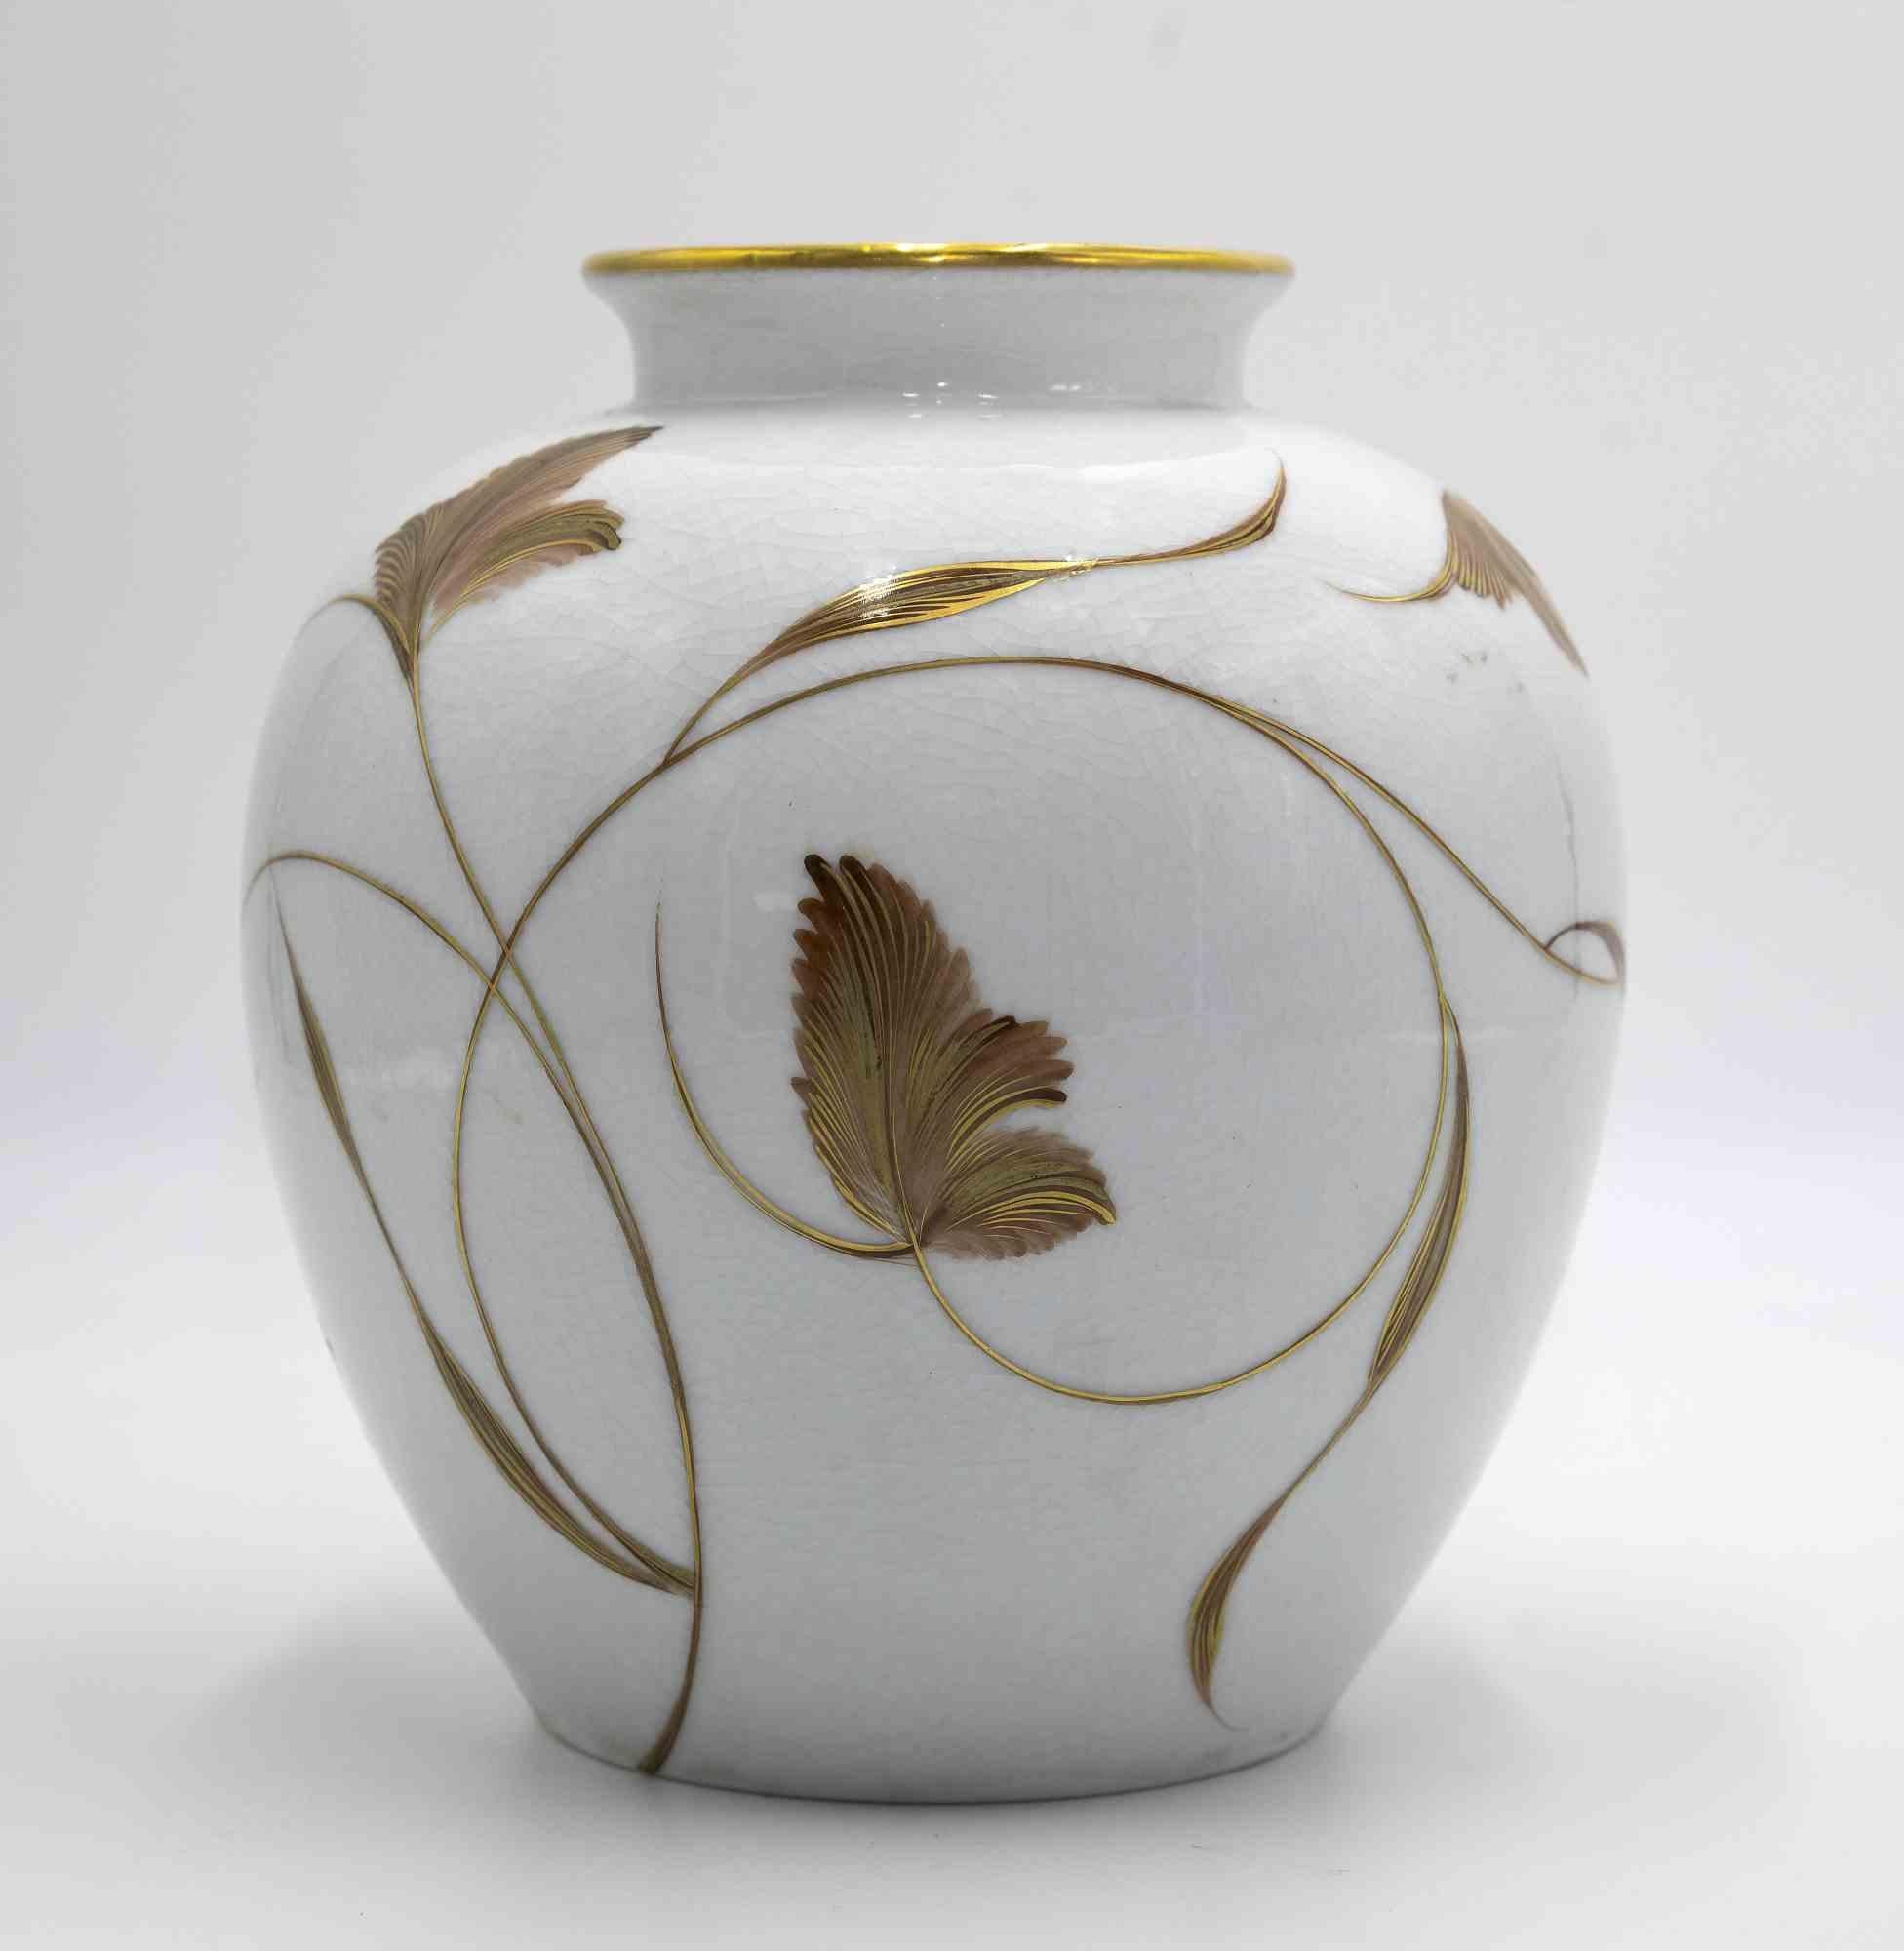 Vintage Rosenthal Gilded Porcelain Vase is an original decorative object realized in the half of 20th century by Rosenthal.

A very elegant vase entirely realized in porcelain.

The body is decorated with a gilded flower decoration.

Label on